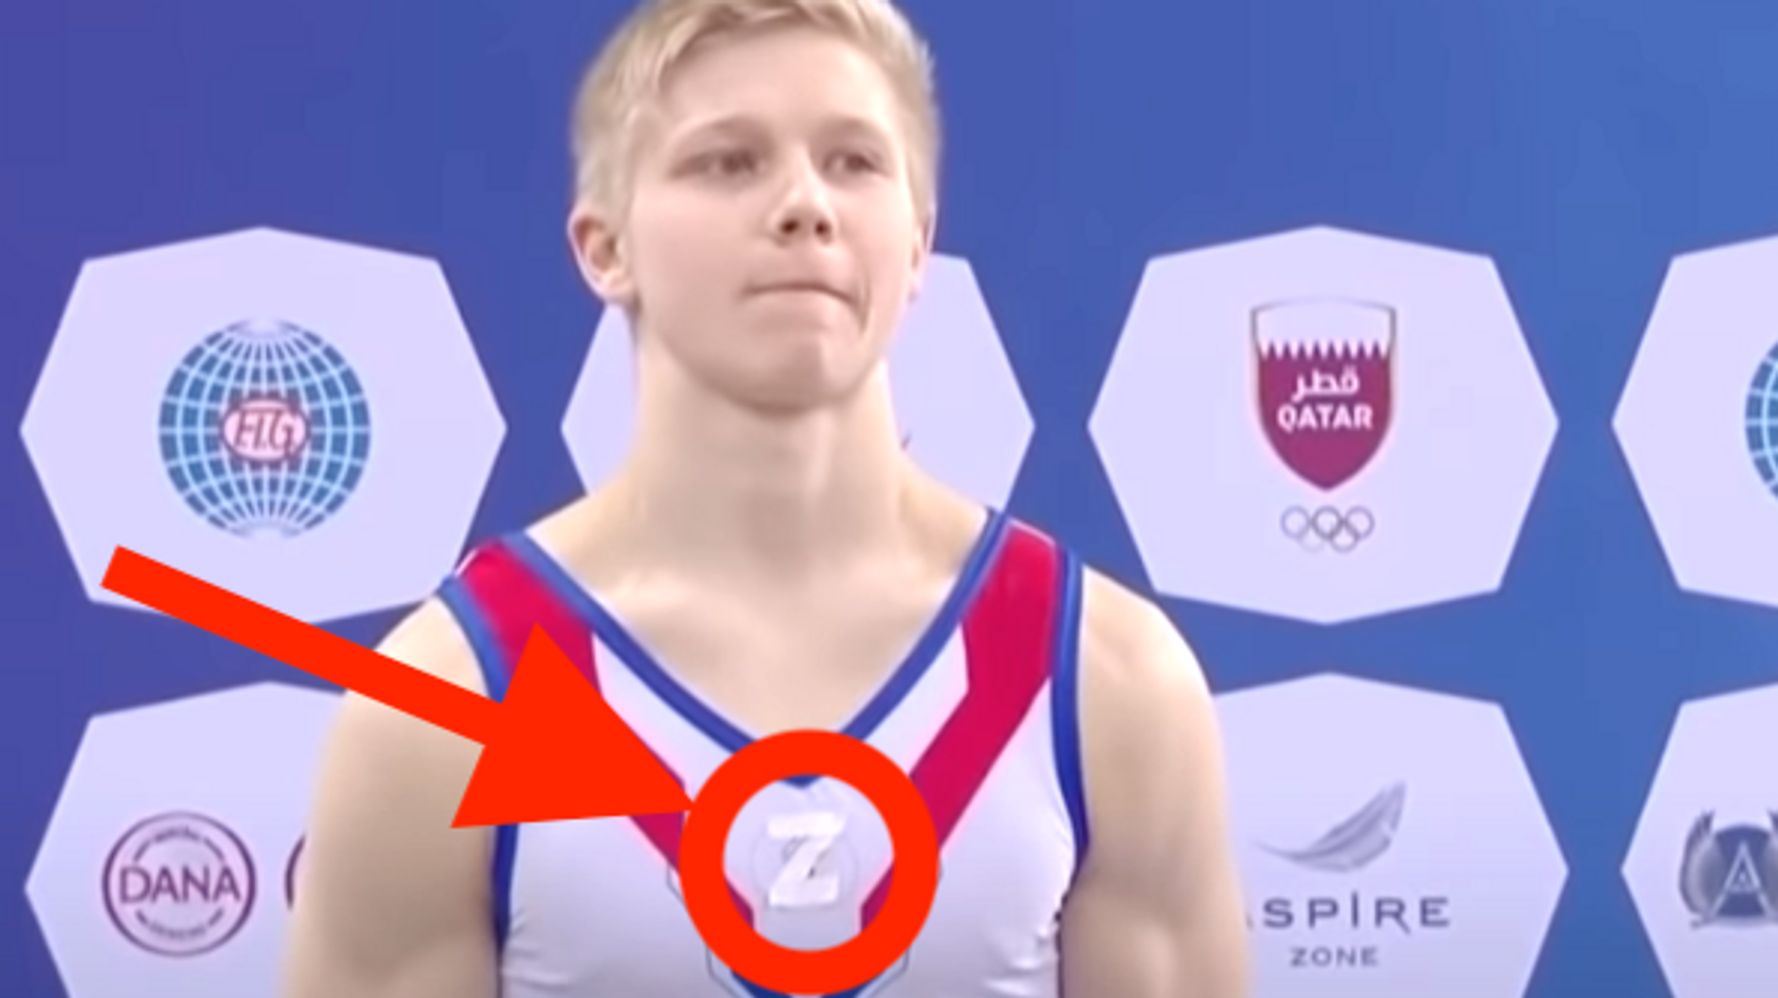 Russian Gymnast Banned For Wearing Pro-War ‘Z’ Symbol Next To Ukrainian Rival